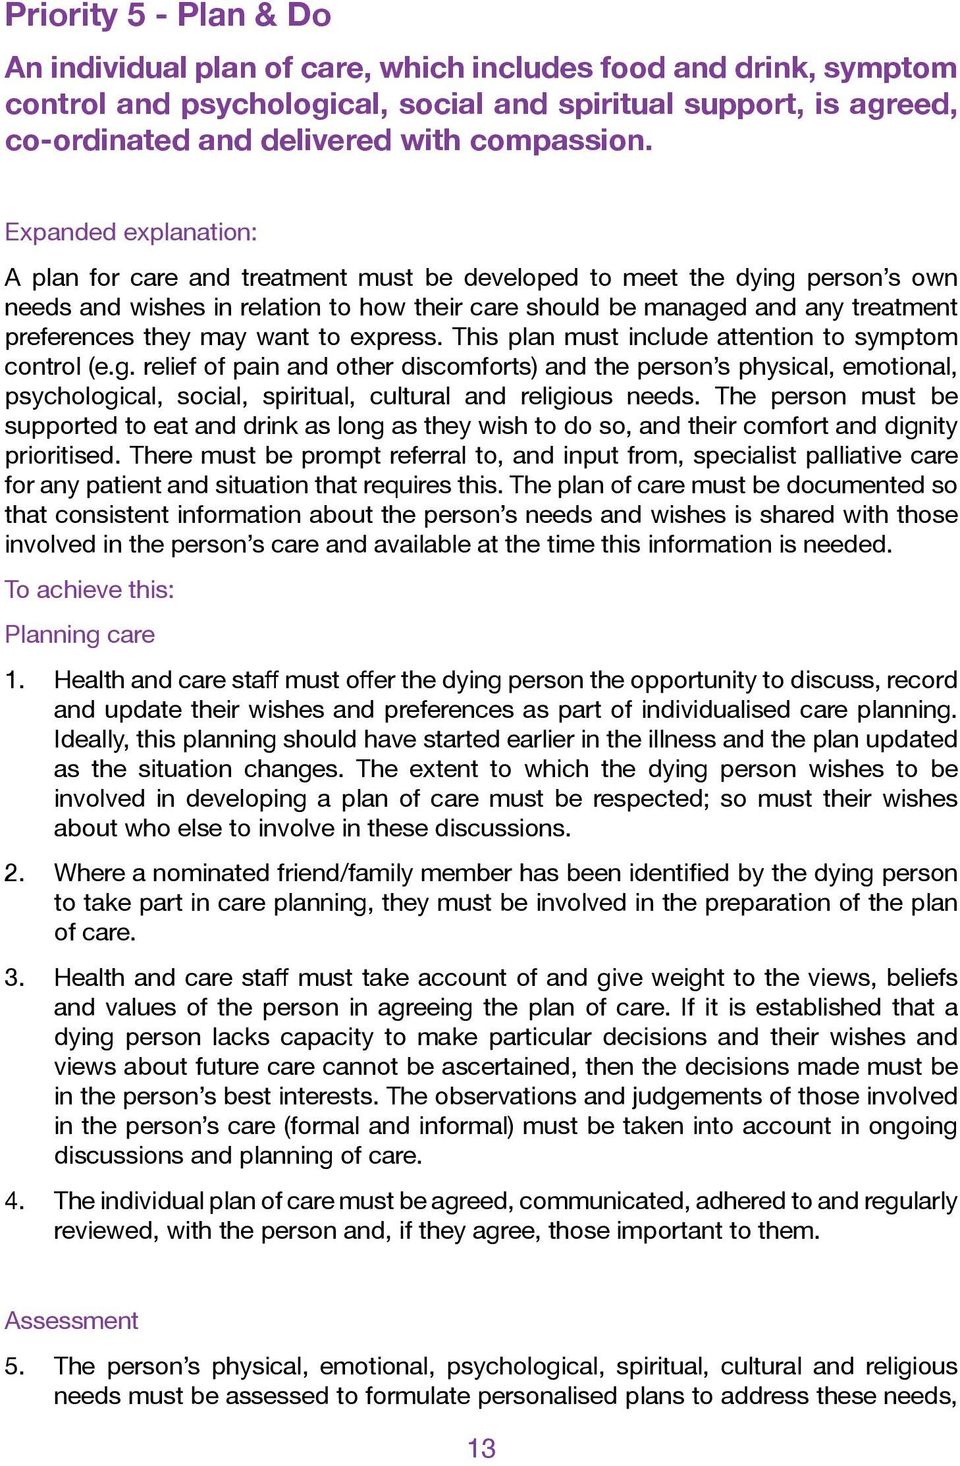 Expanded explanation: A plan for care and treatment must be developed to meet the dying person s own needs and wishes in relation to how their care should be managed and any treatment preferences